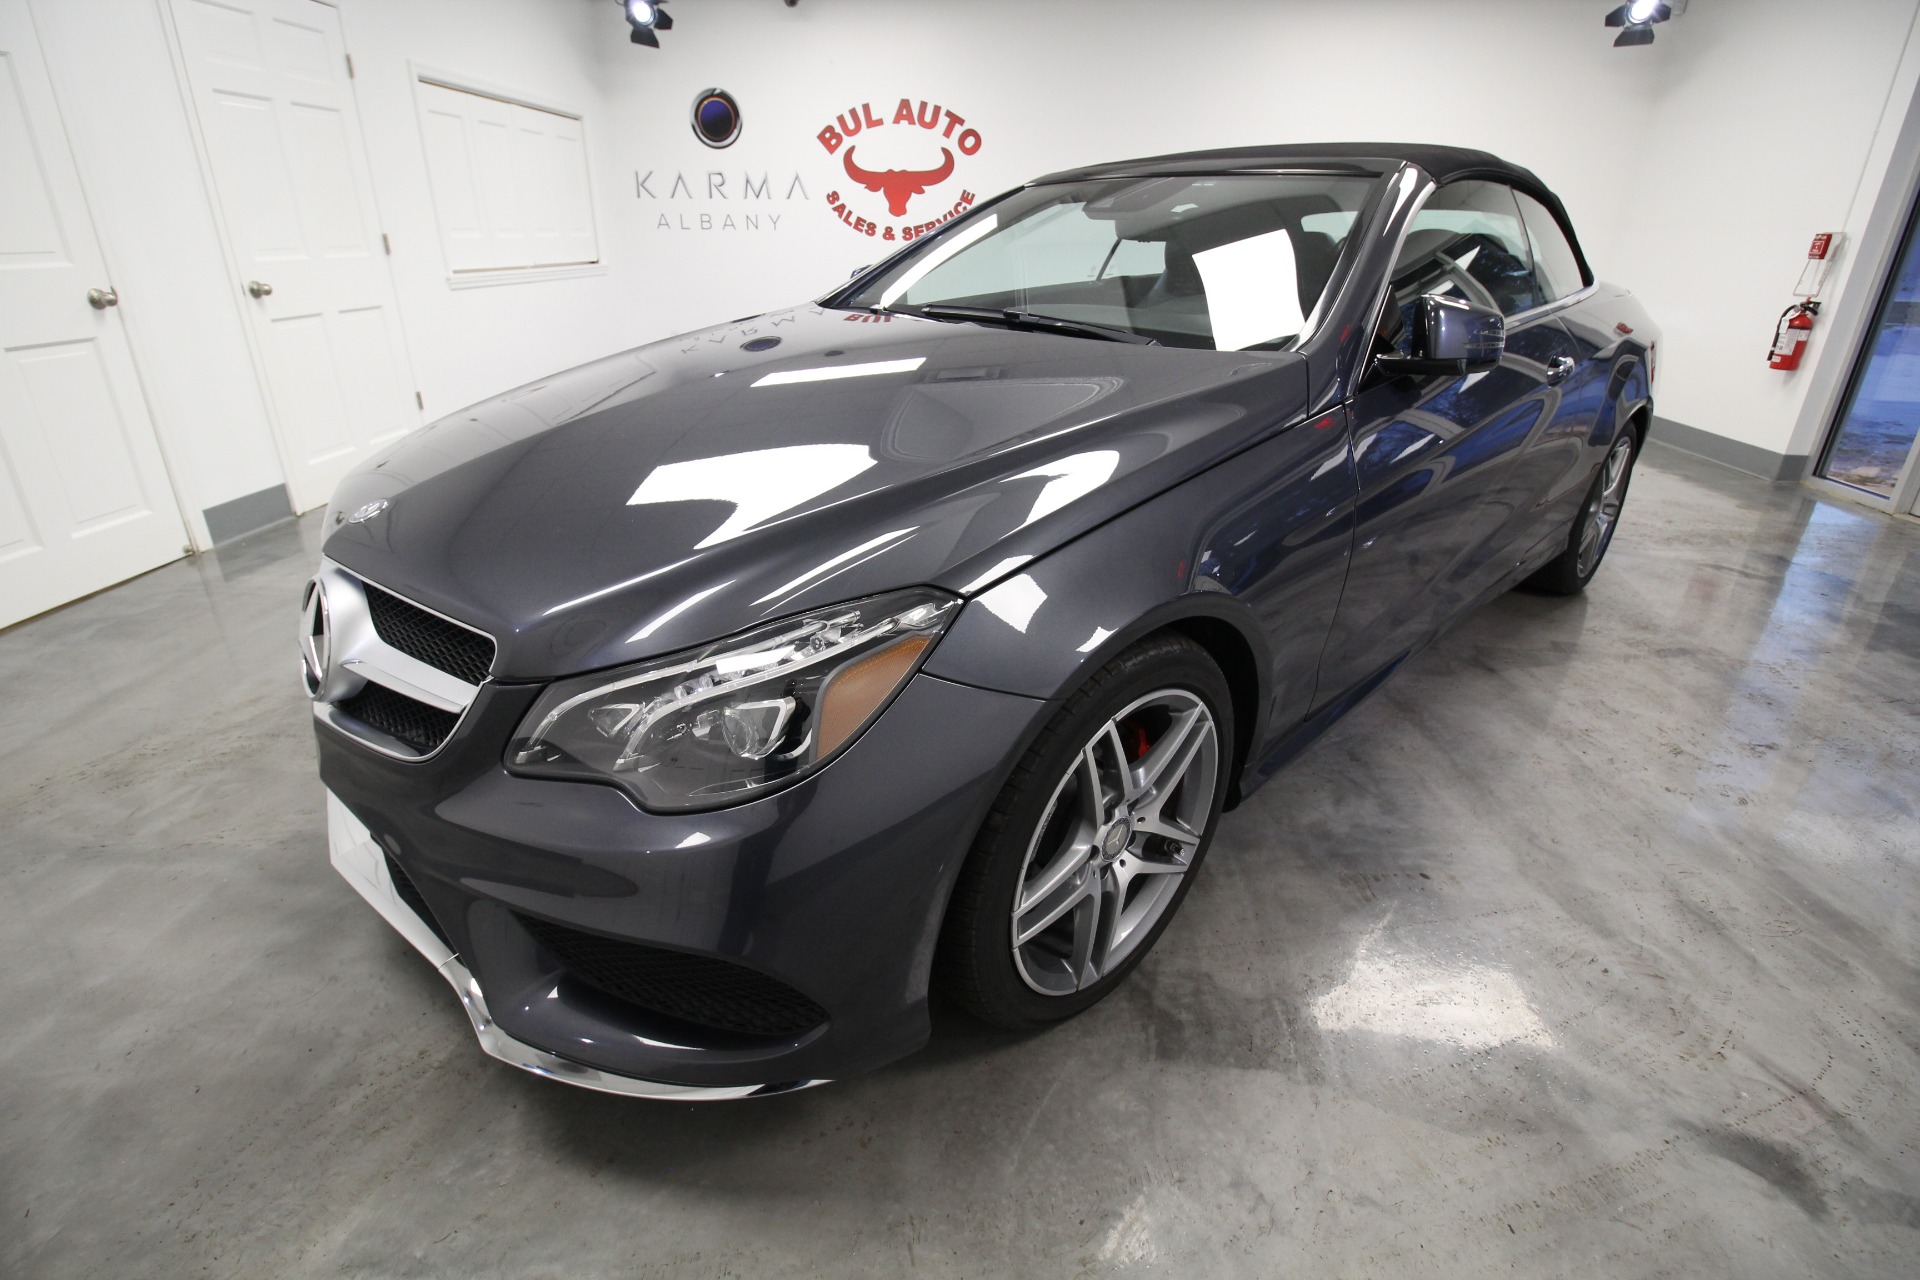 Used 2016 Steel Grey Metallic Mercedes-Benz E-Class E400 CABRIOLET CONVERTIBLE SUPERB INSIDE AND OUT LOW MILES | Albany, NY